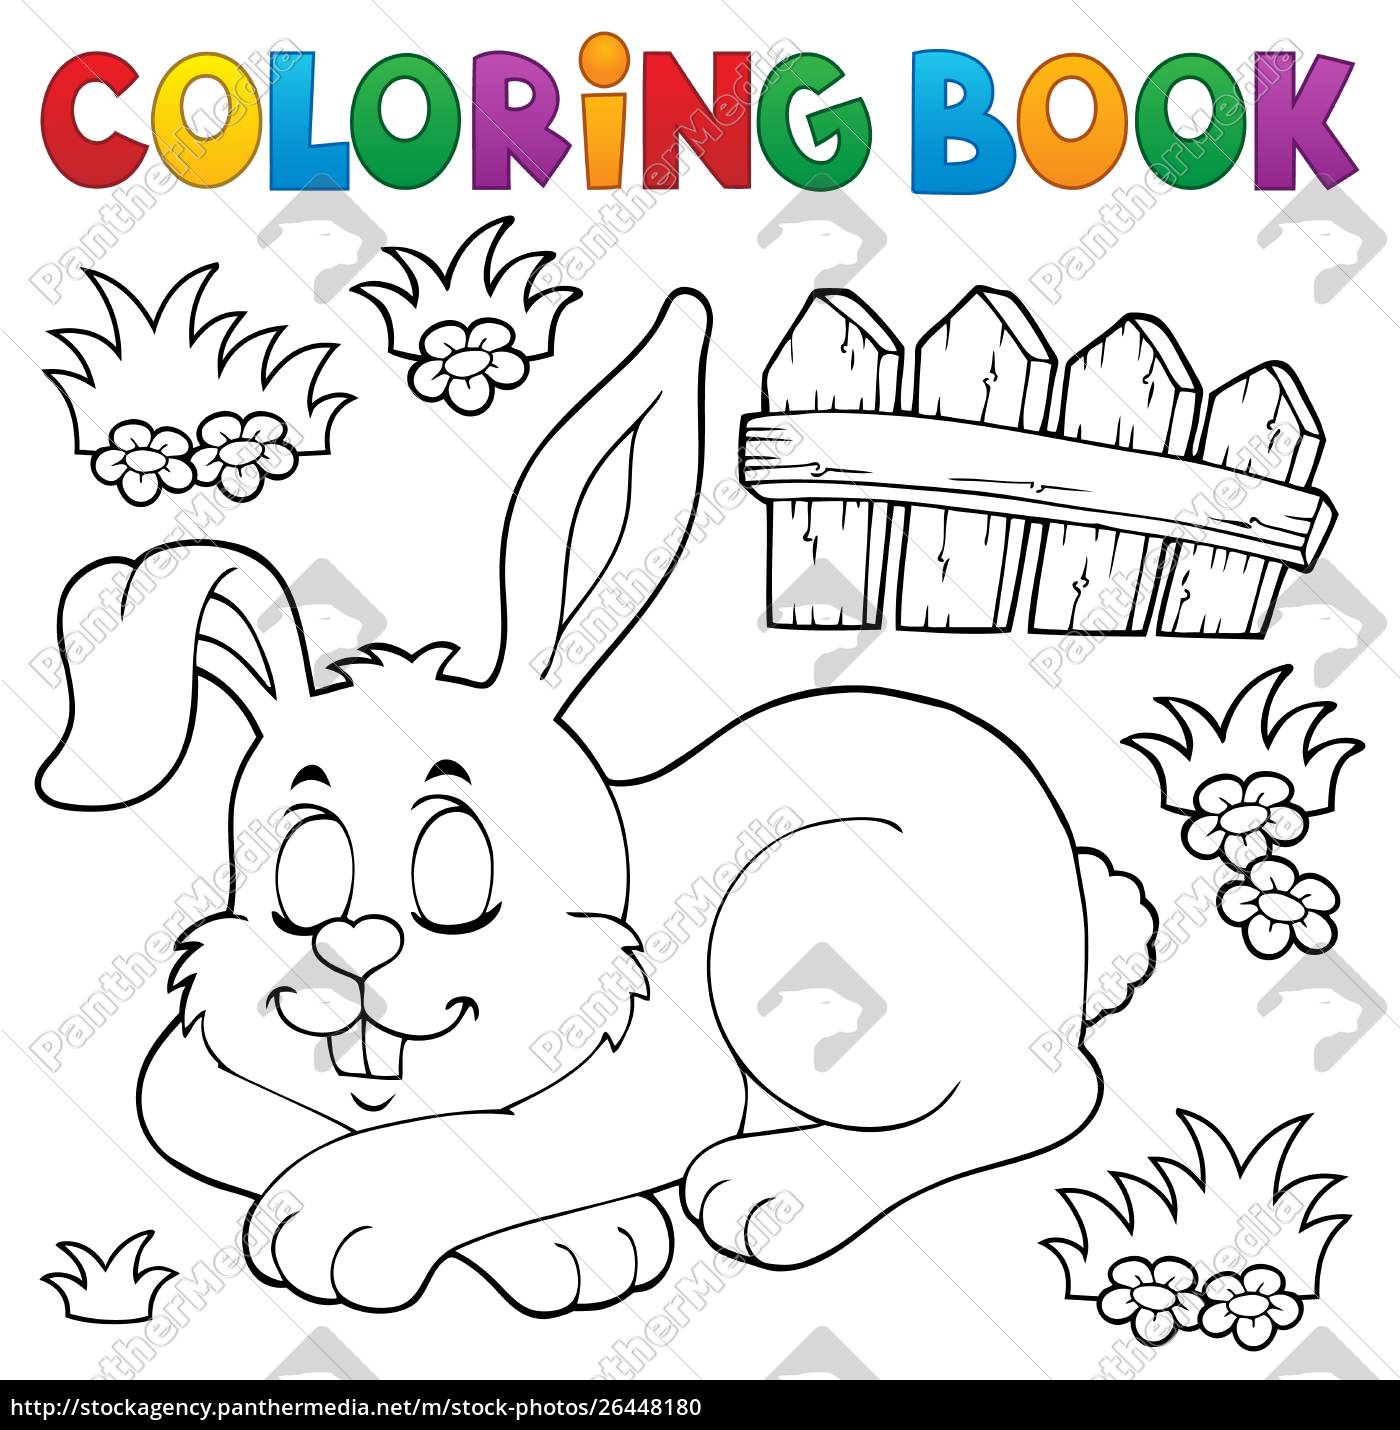 Download Coloring Book Sleeping Bunny Theme 1 Royalty Free Photo 26448180 Panthermedia Stock Agency